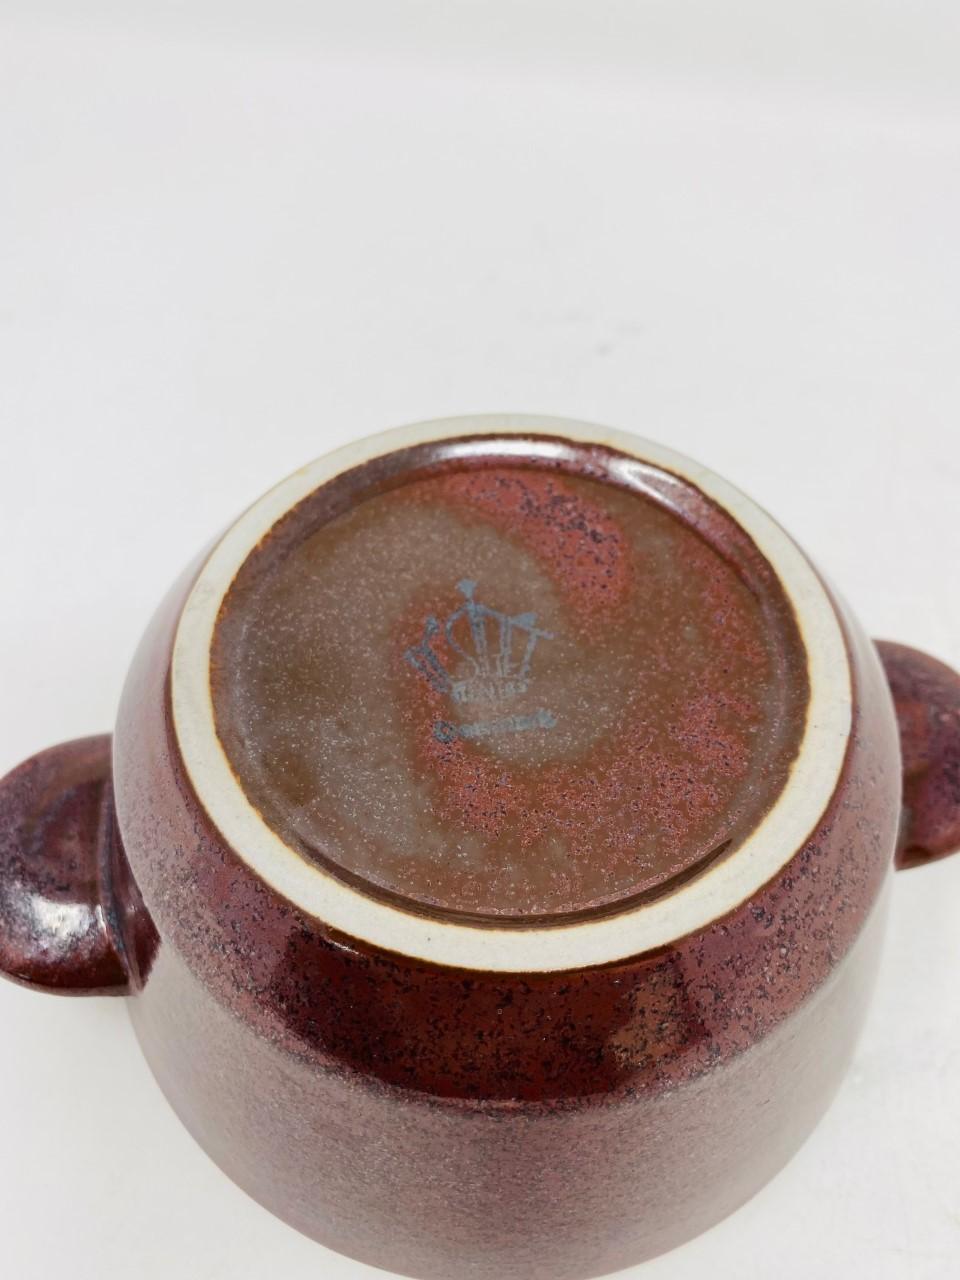 Beautiful vintage set of 7 ceramic soup bowls by Stentoj Denmark. Undeniably midcentury, these bowls are charming and timeless and a perfect example of Soholm Pottery. Each bowl is beautifully finished in an earthy merlot color glaze that can